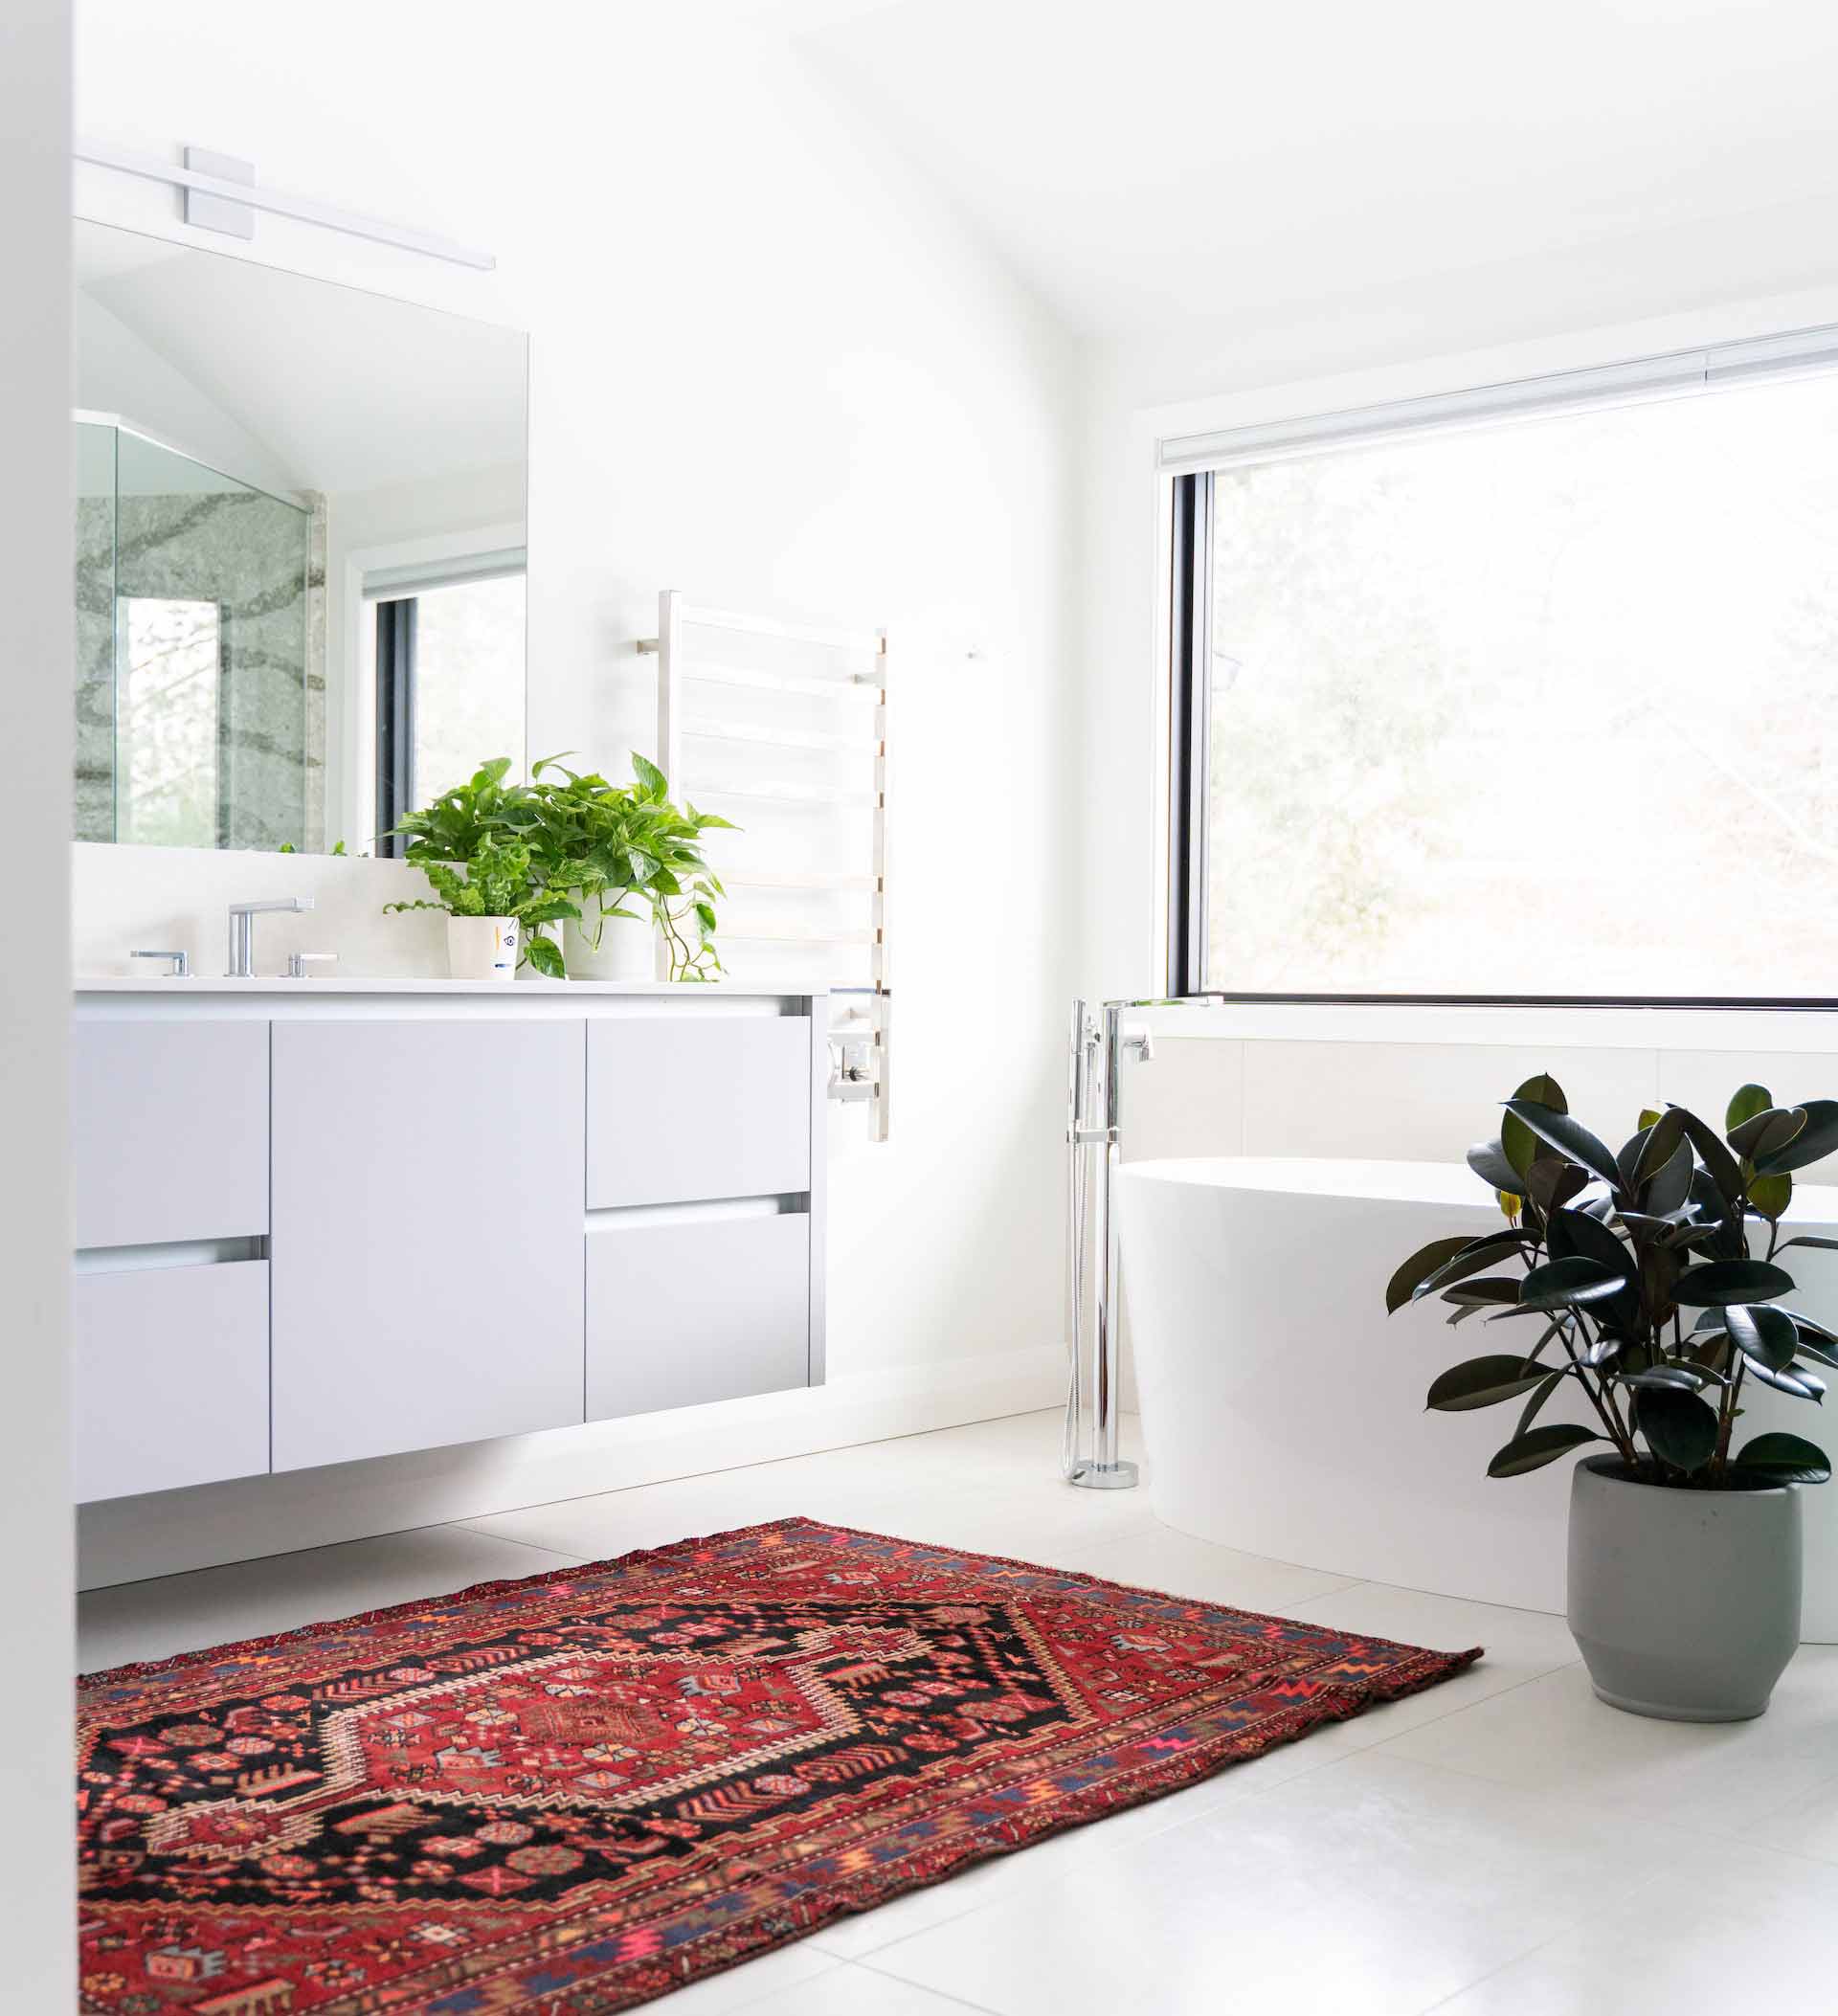 Bathroom with red carpet and plants in natural light